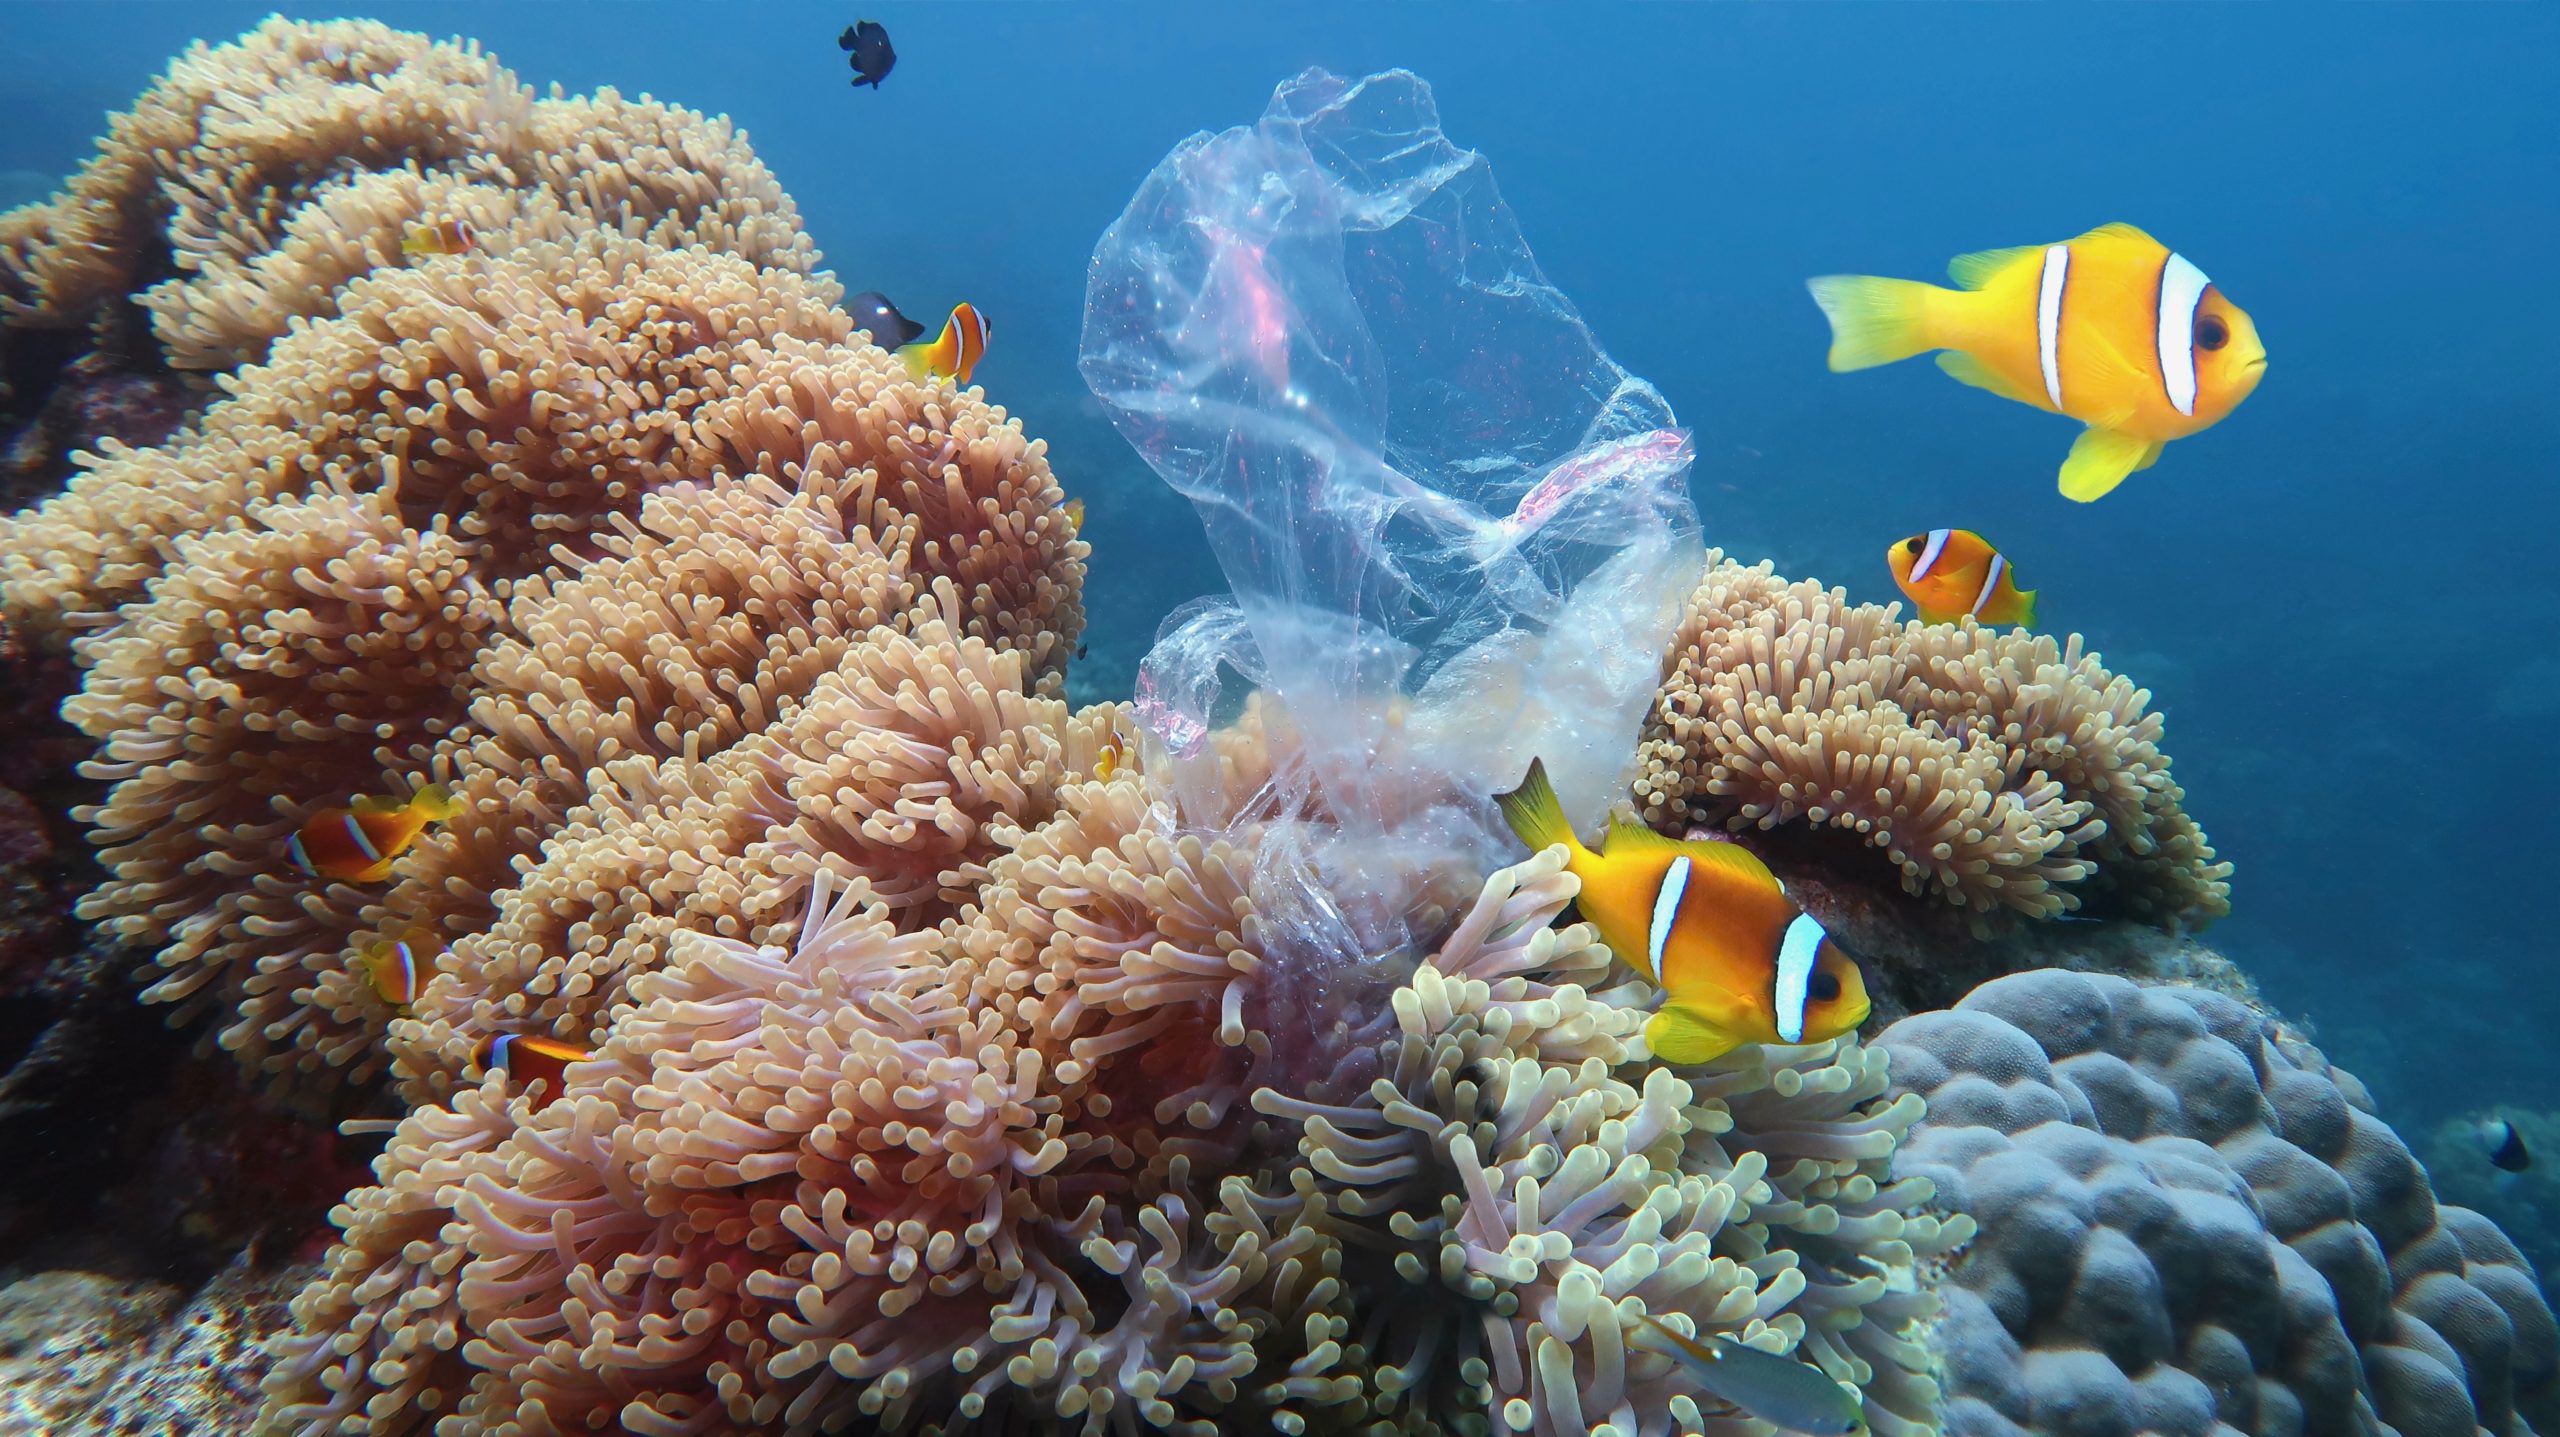 Clown fish swimming in reef with plastic bag